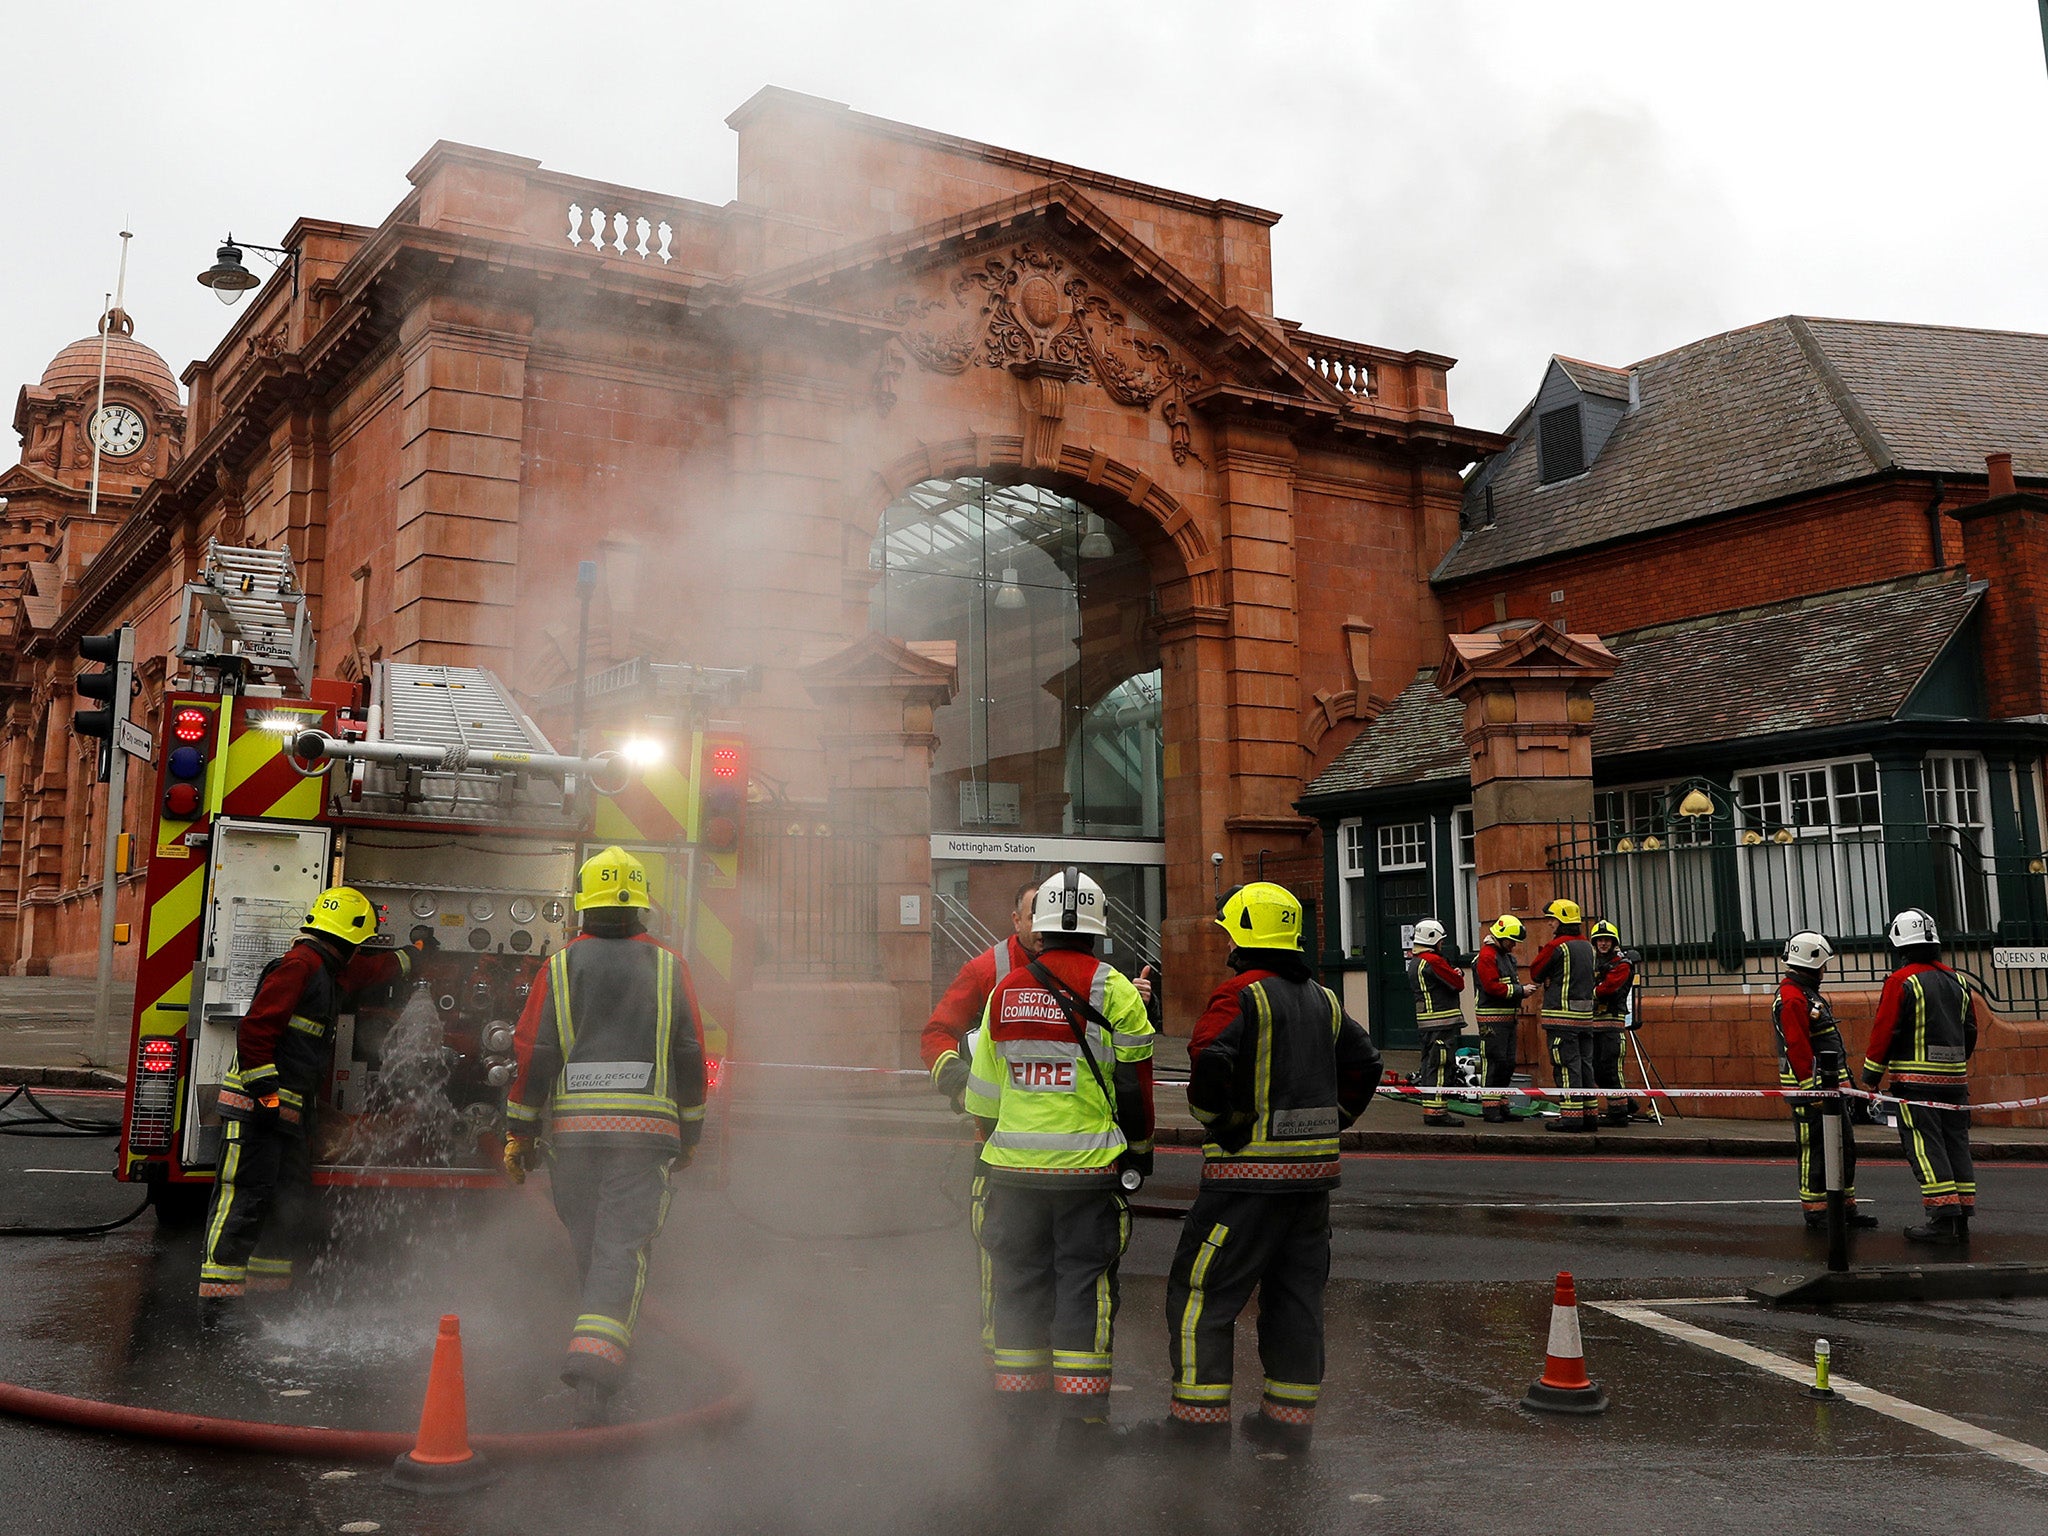 The fire started at 6.30am and spread from the toilets to the main concourse and roof